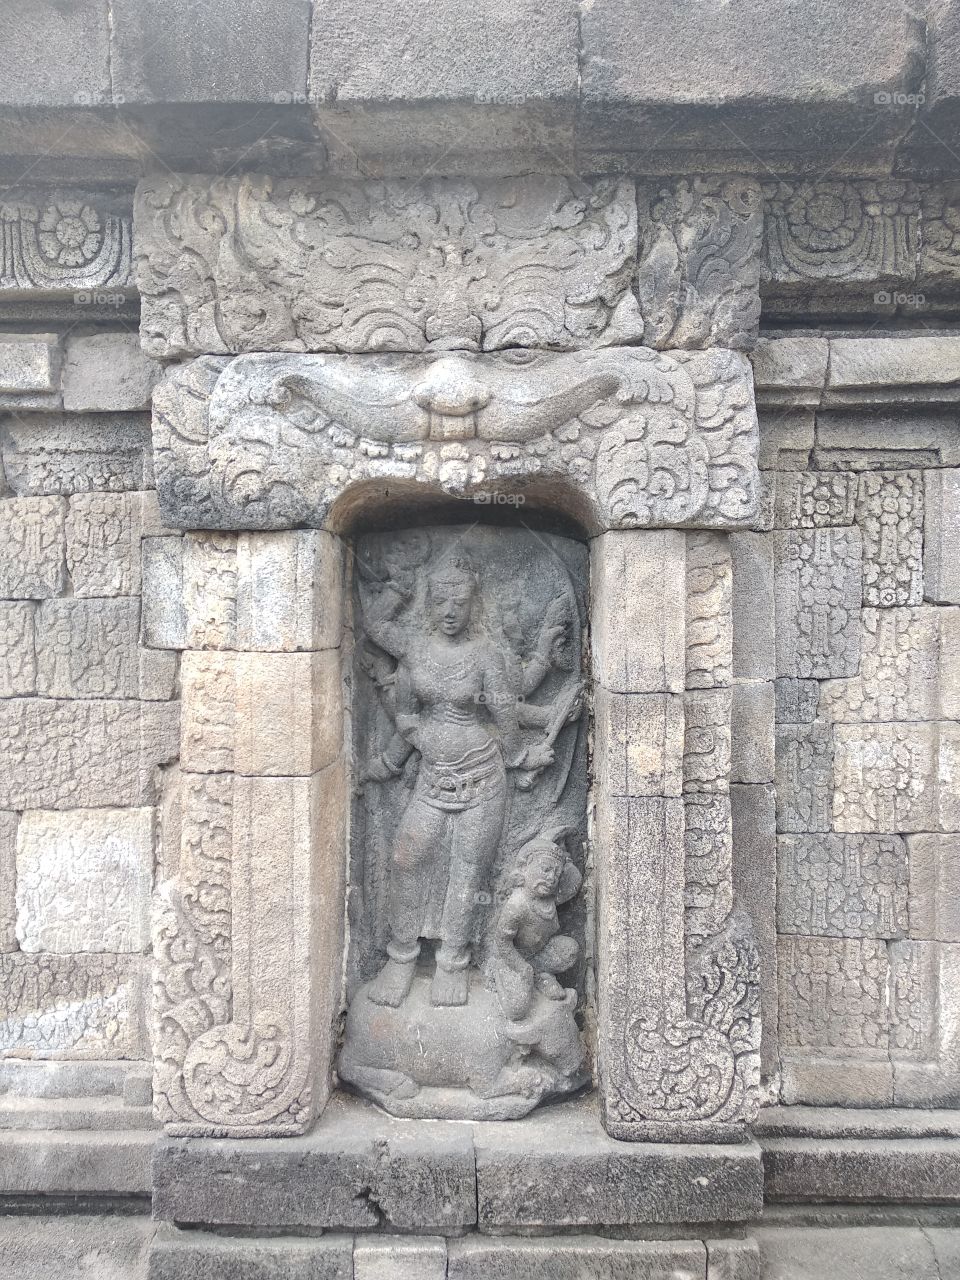 Goddess Durga relief at Javanese Temple